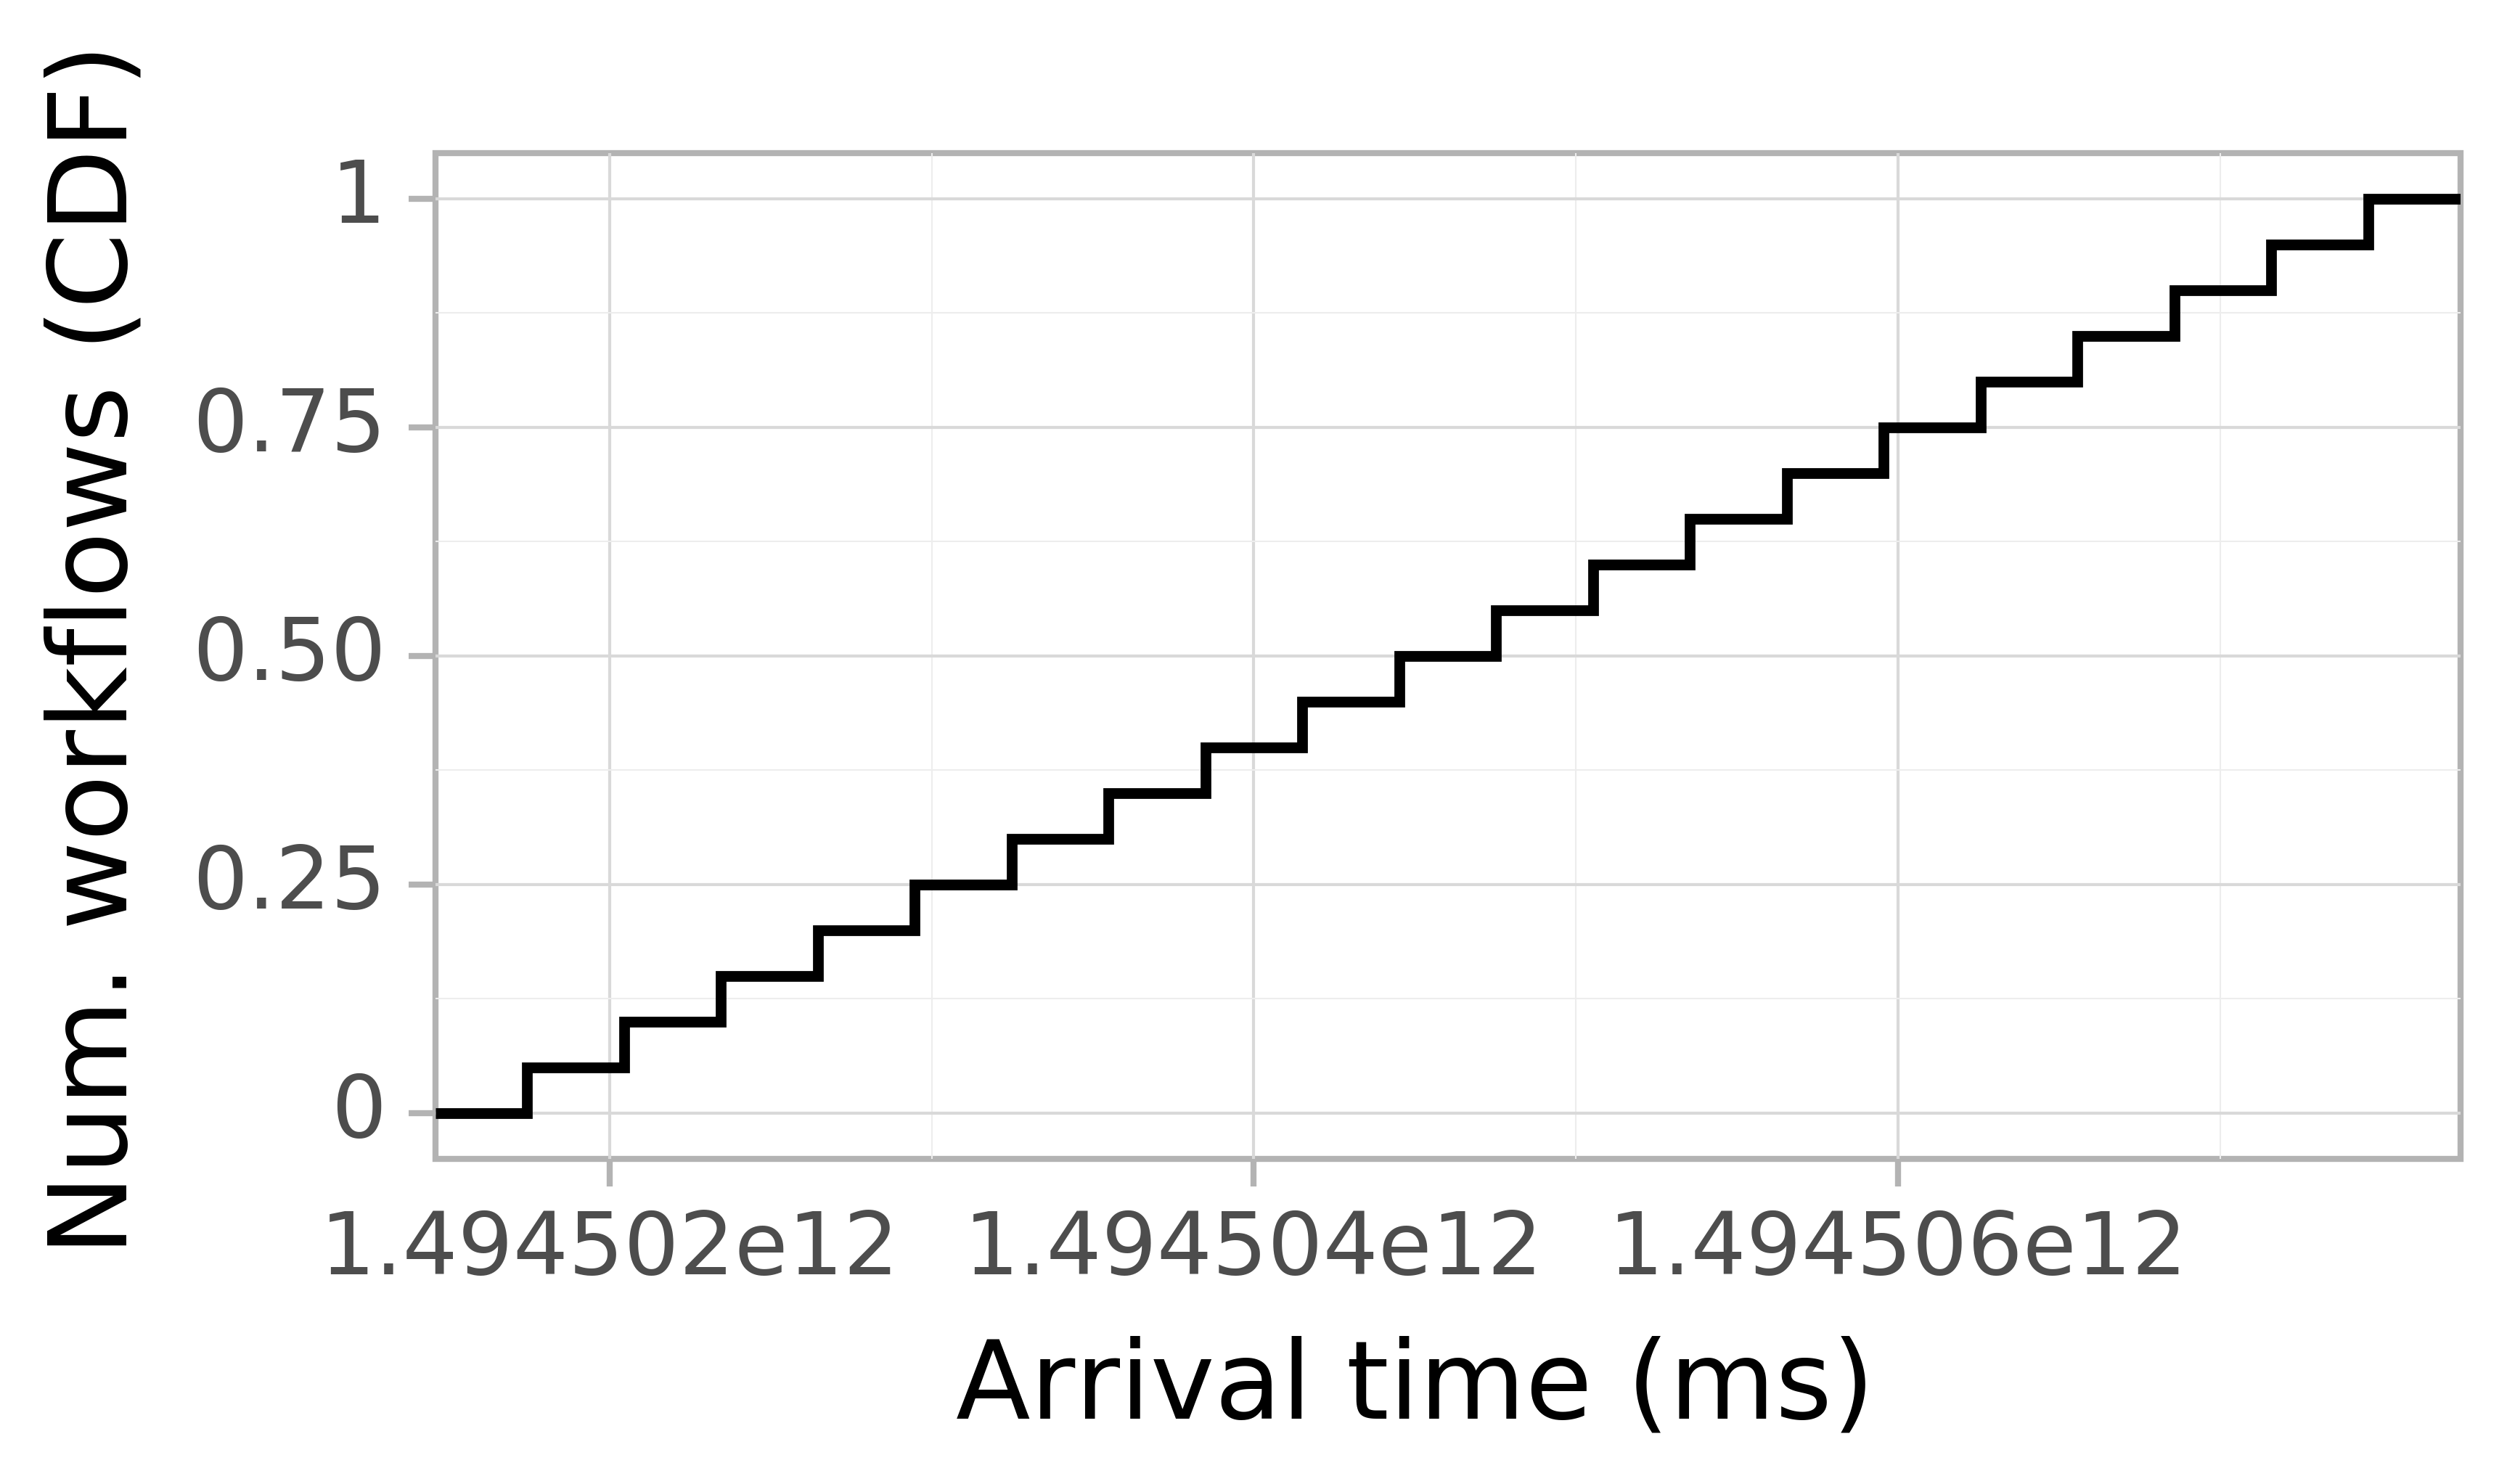 Job arrival CDF graph for the askalon-new_ee47 trace.